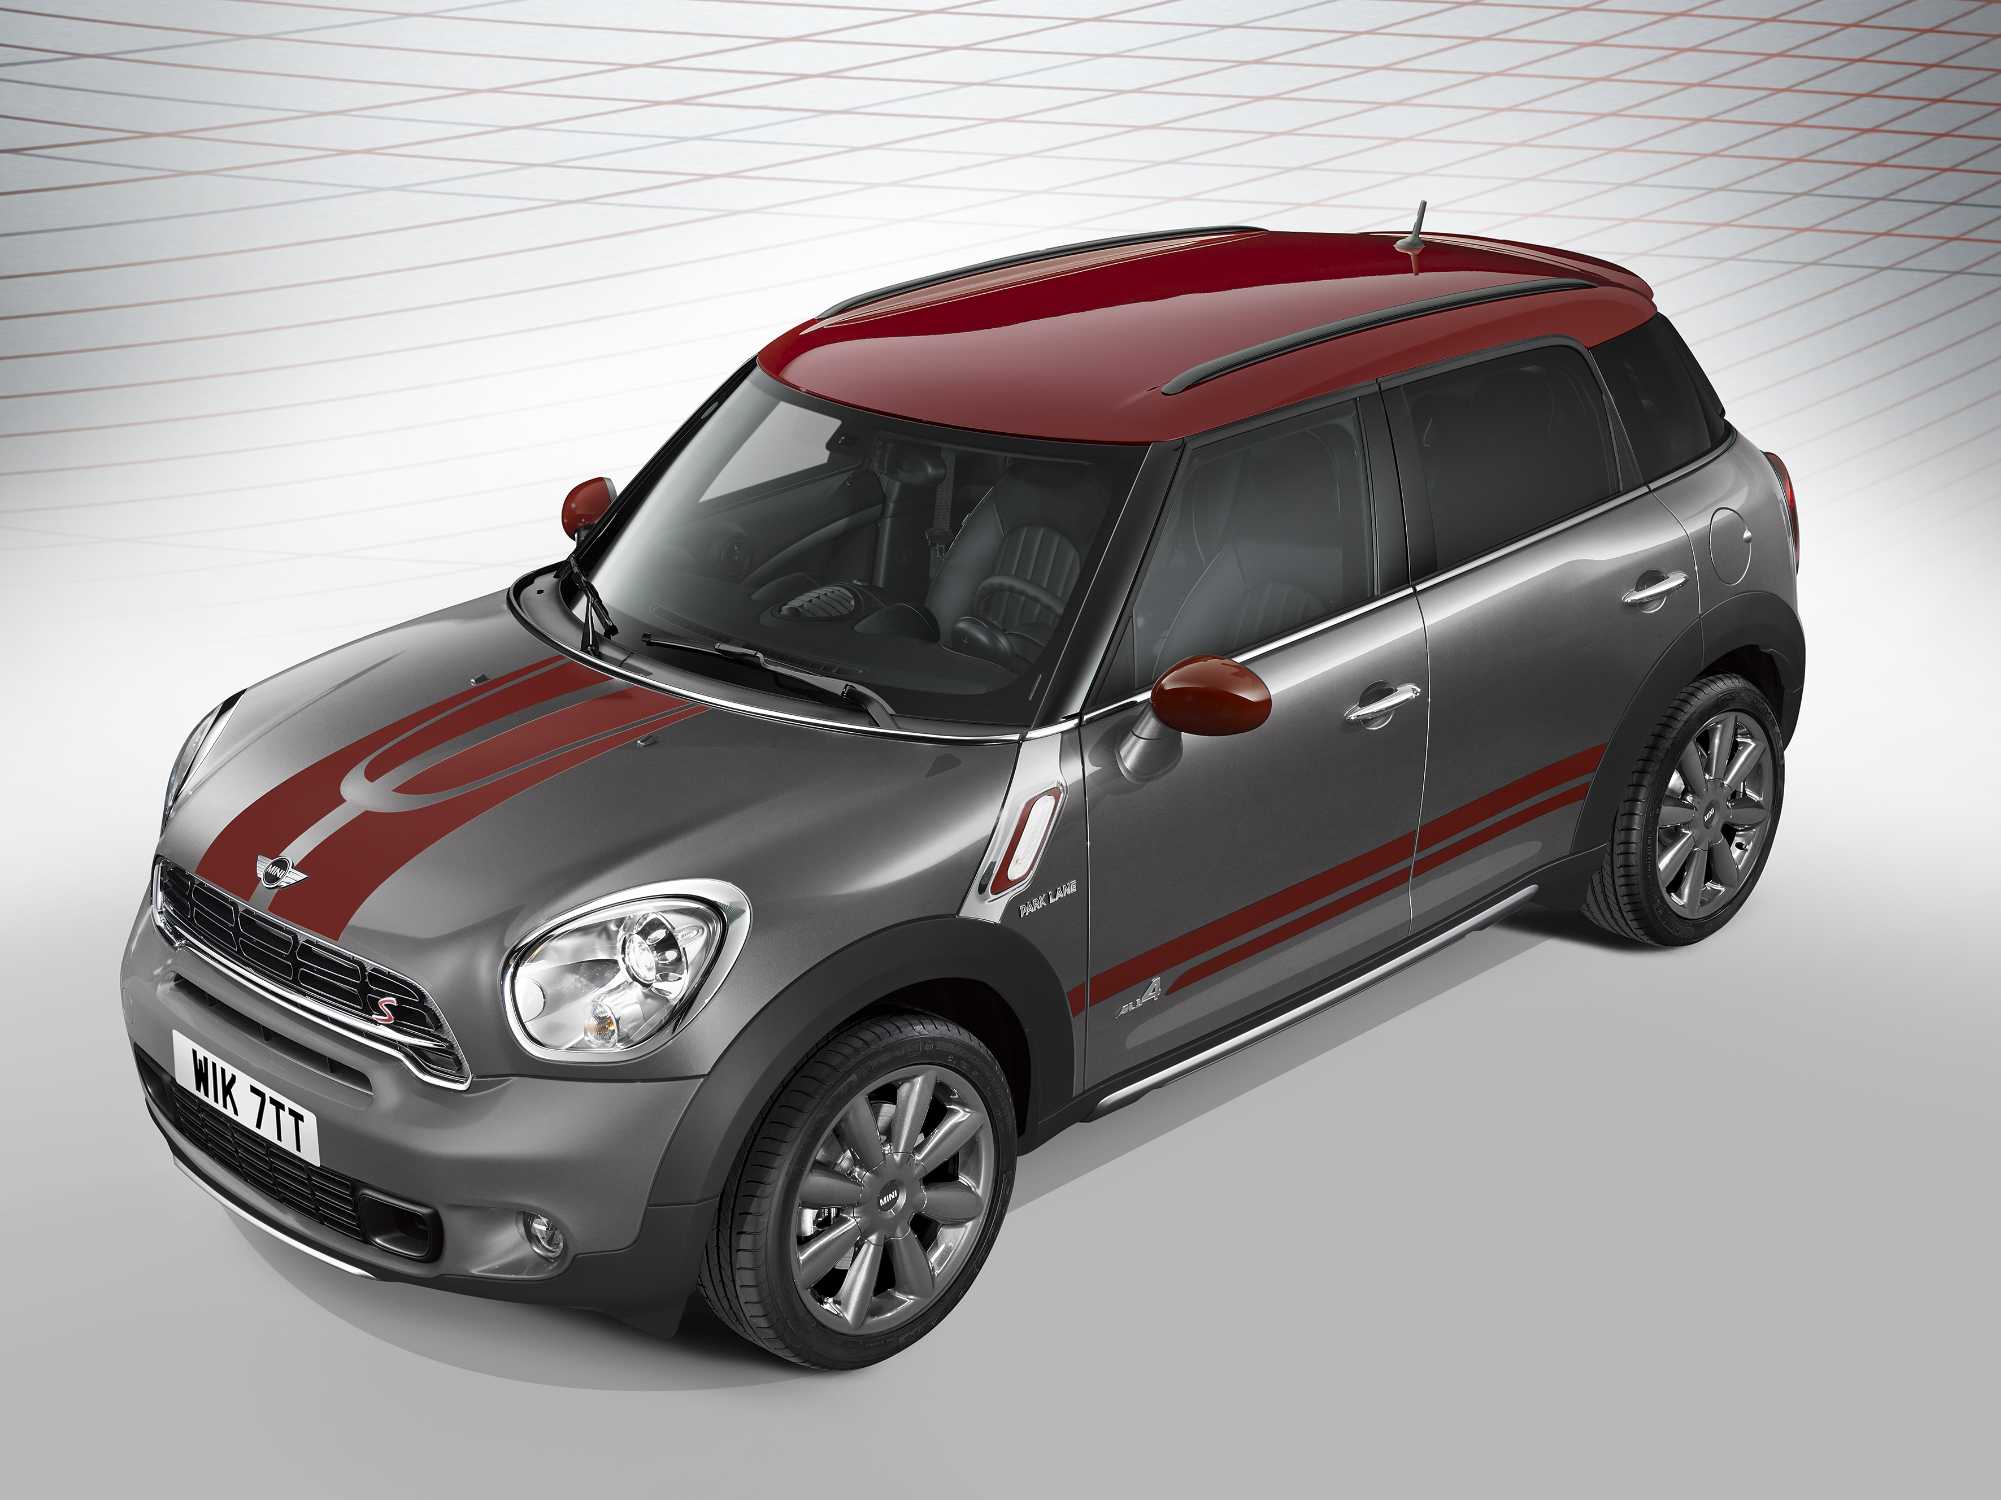 All-round talent with individual style: the MINI Countryman Park Lane.